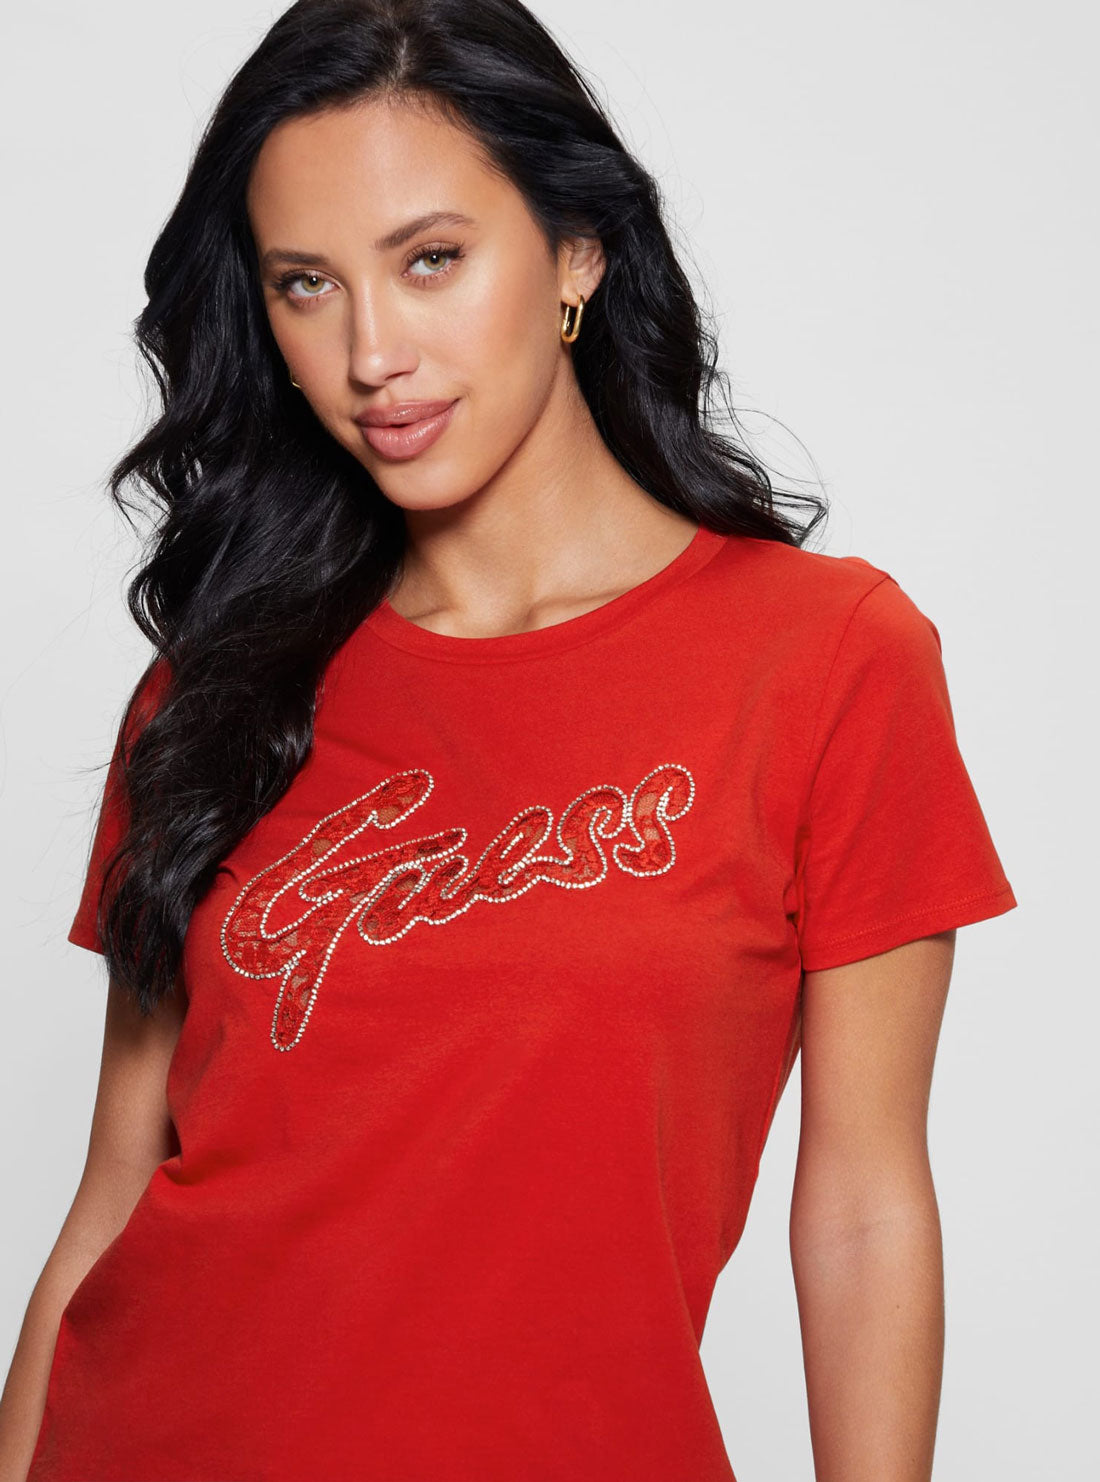 GUESS Red Short Sleeve Lace Logo T-Shirt detail view